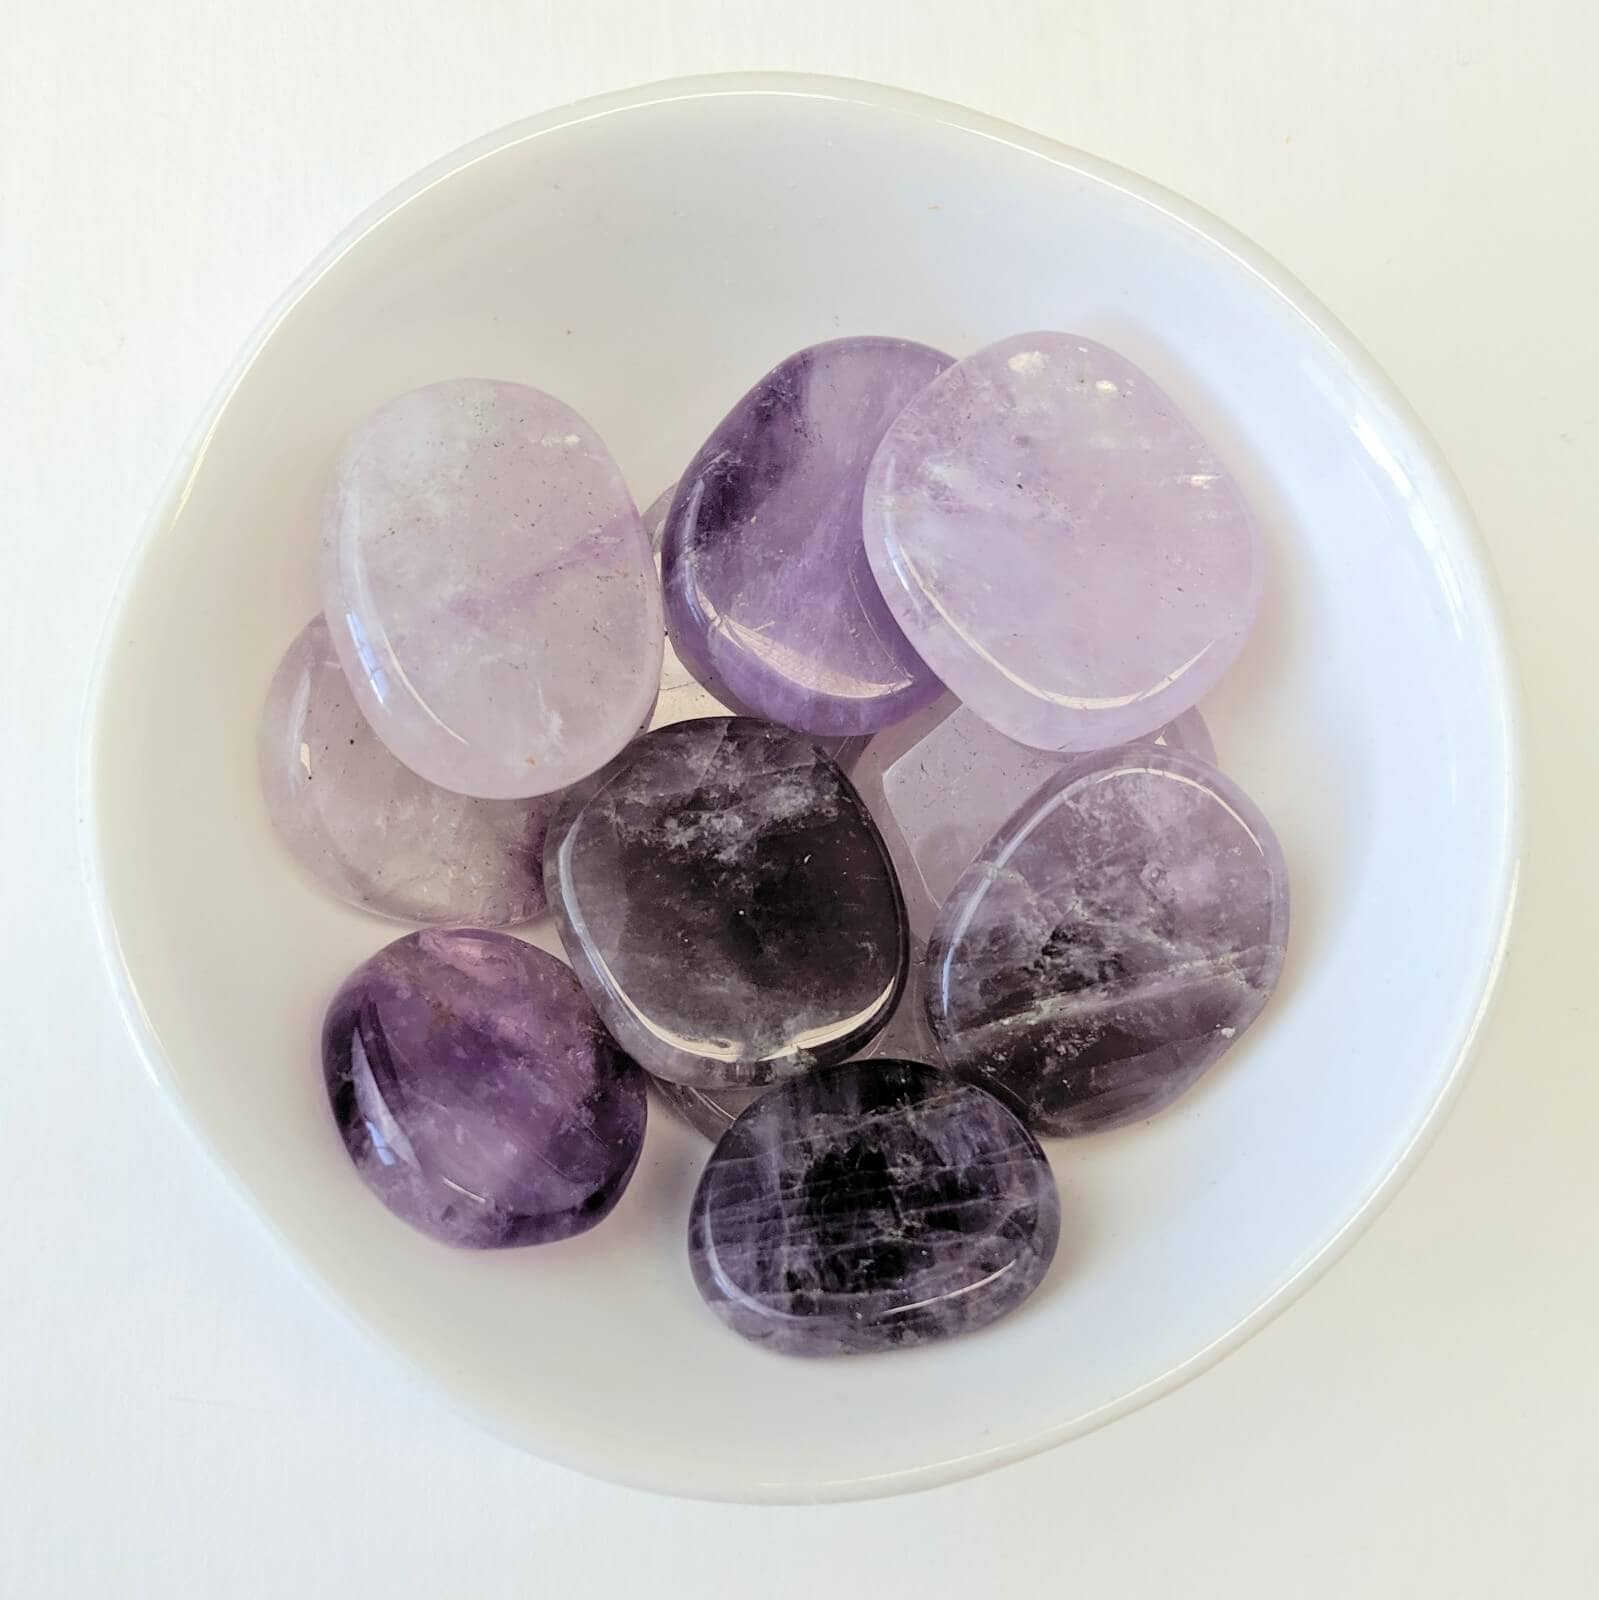 Amethyst Crystal Flat Stone Discs In A White Bowl - Top View